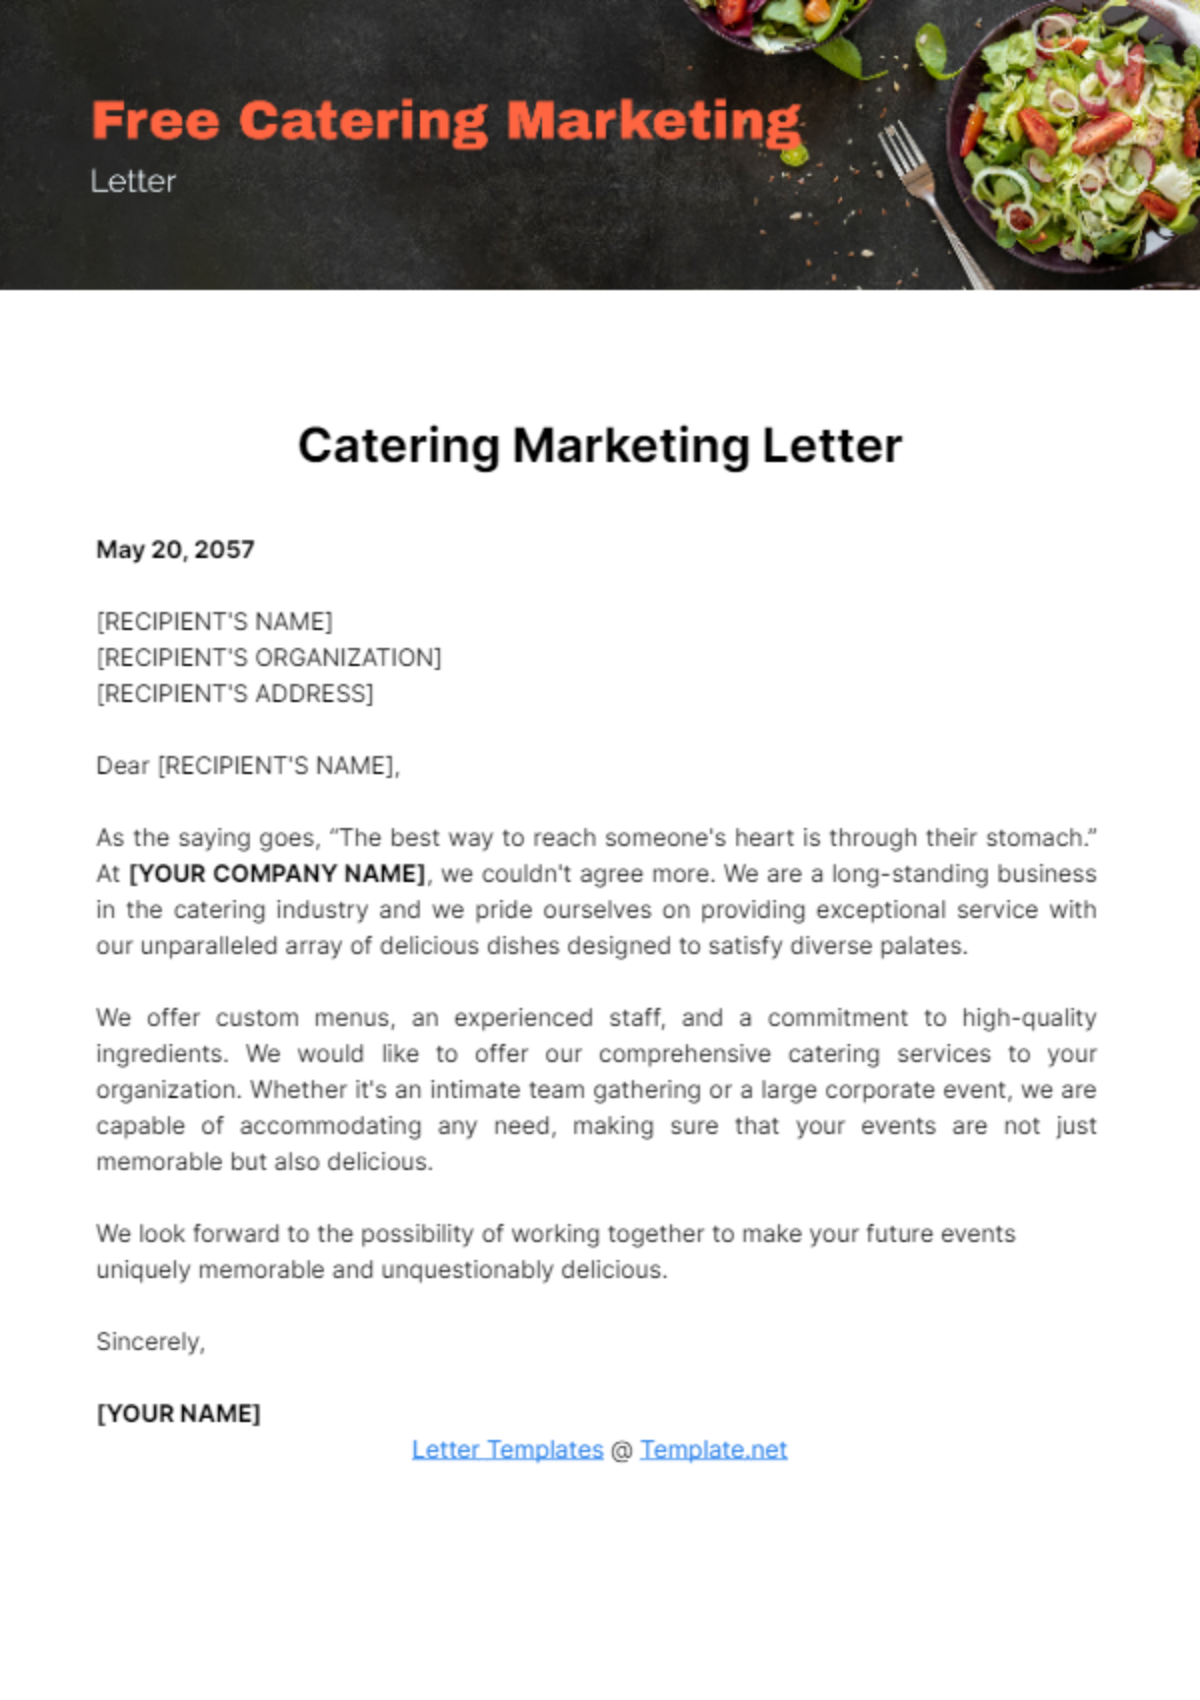 Free Catering Marketing Letter Template